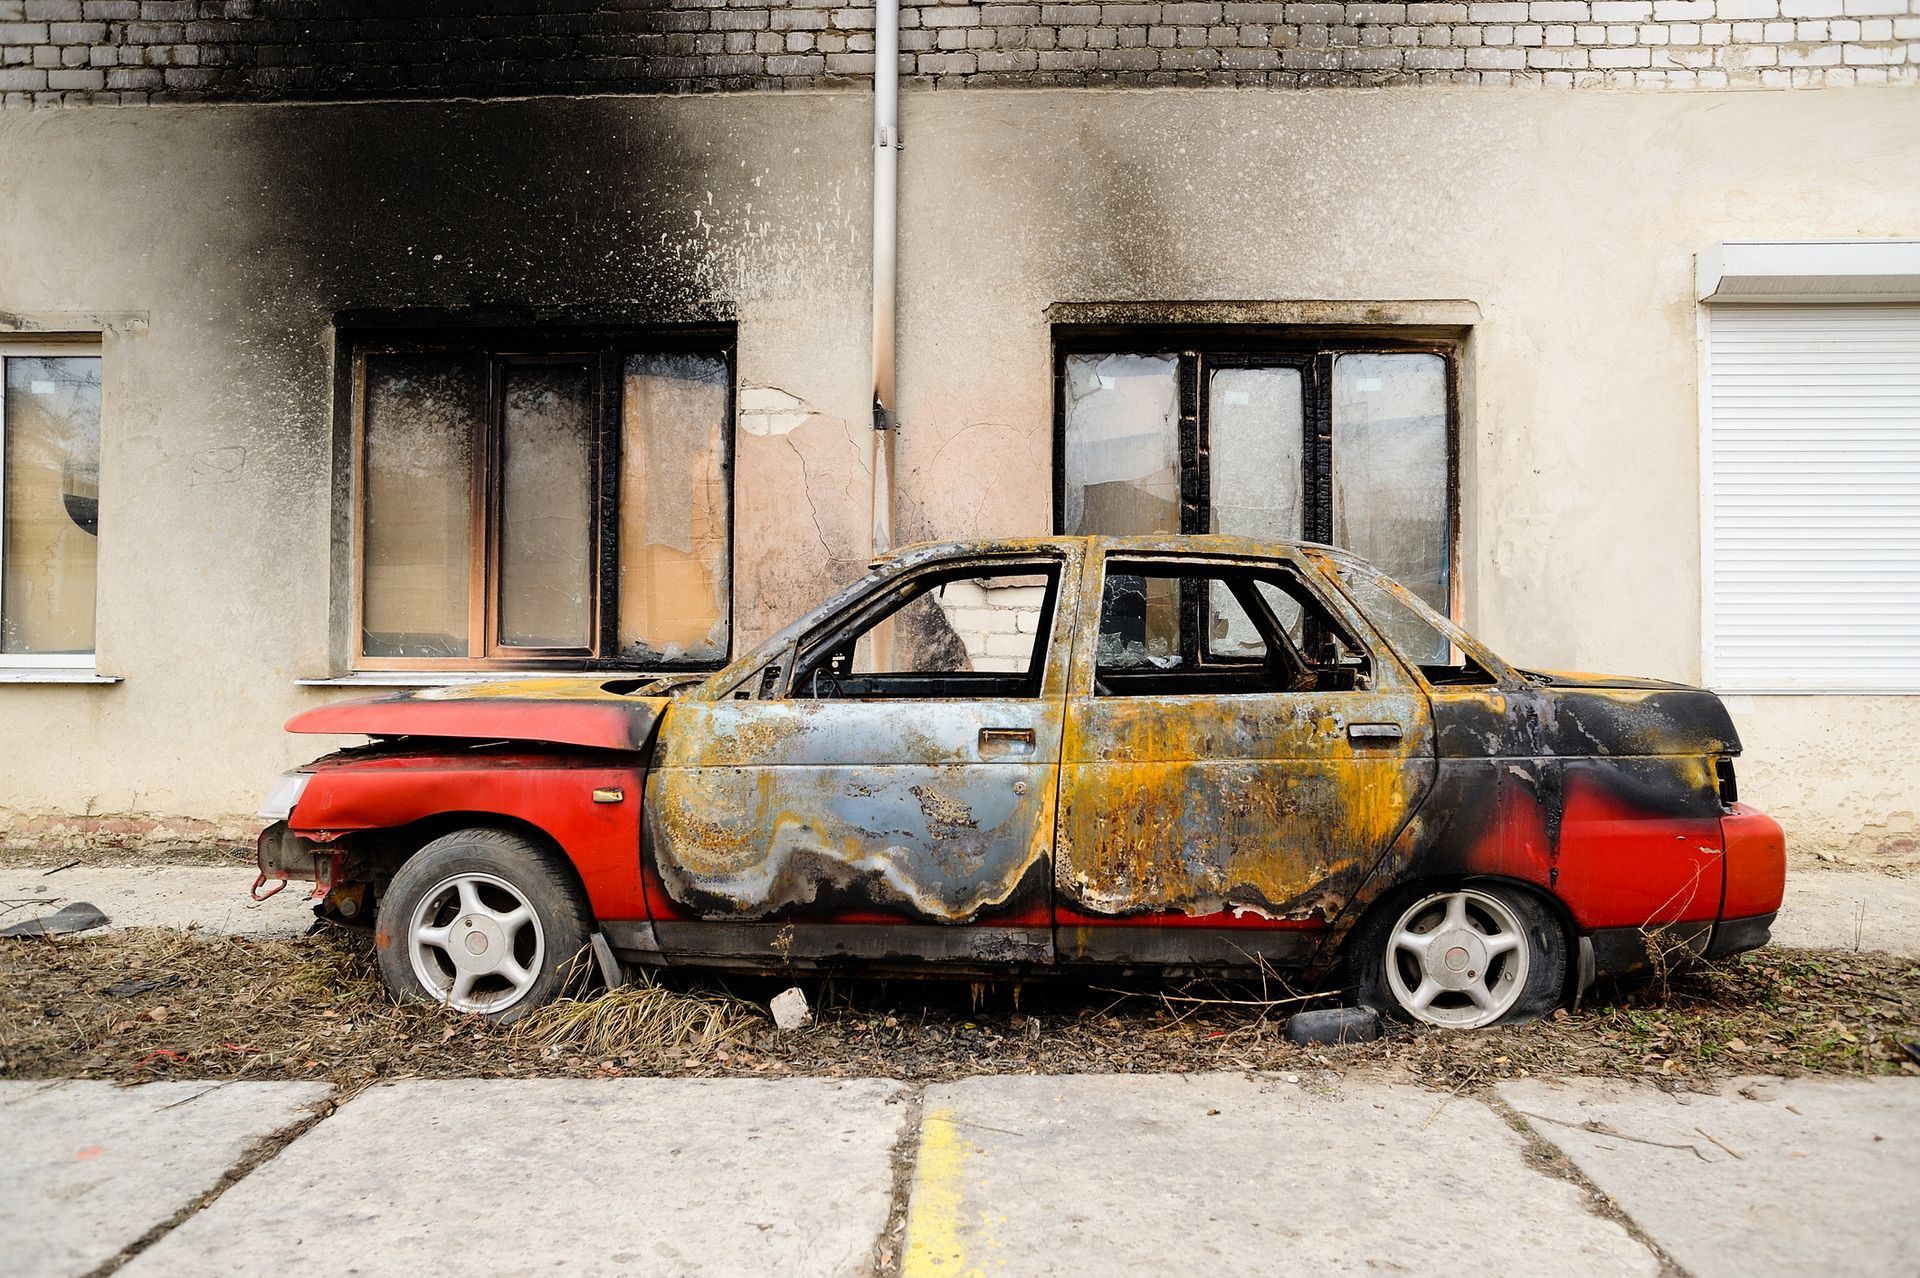 A burned car parked in front of a property.